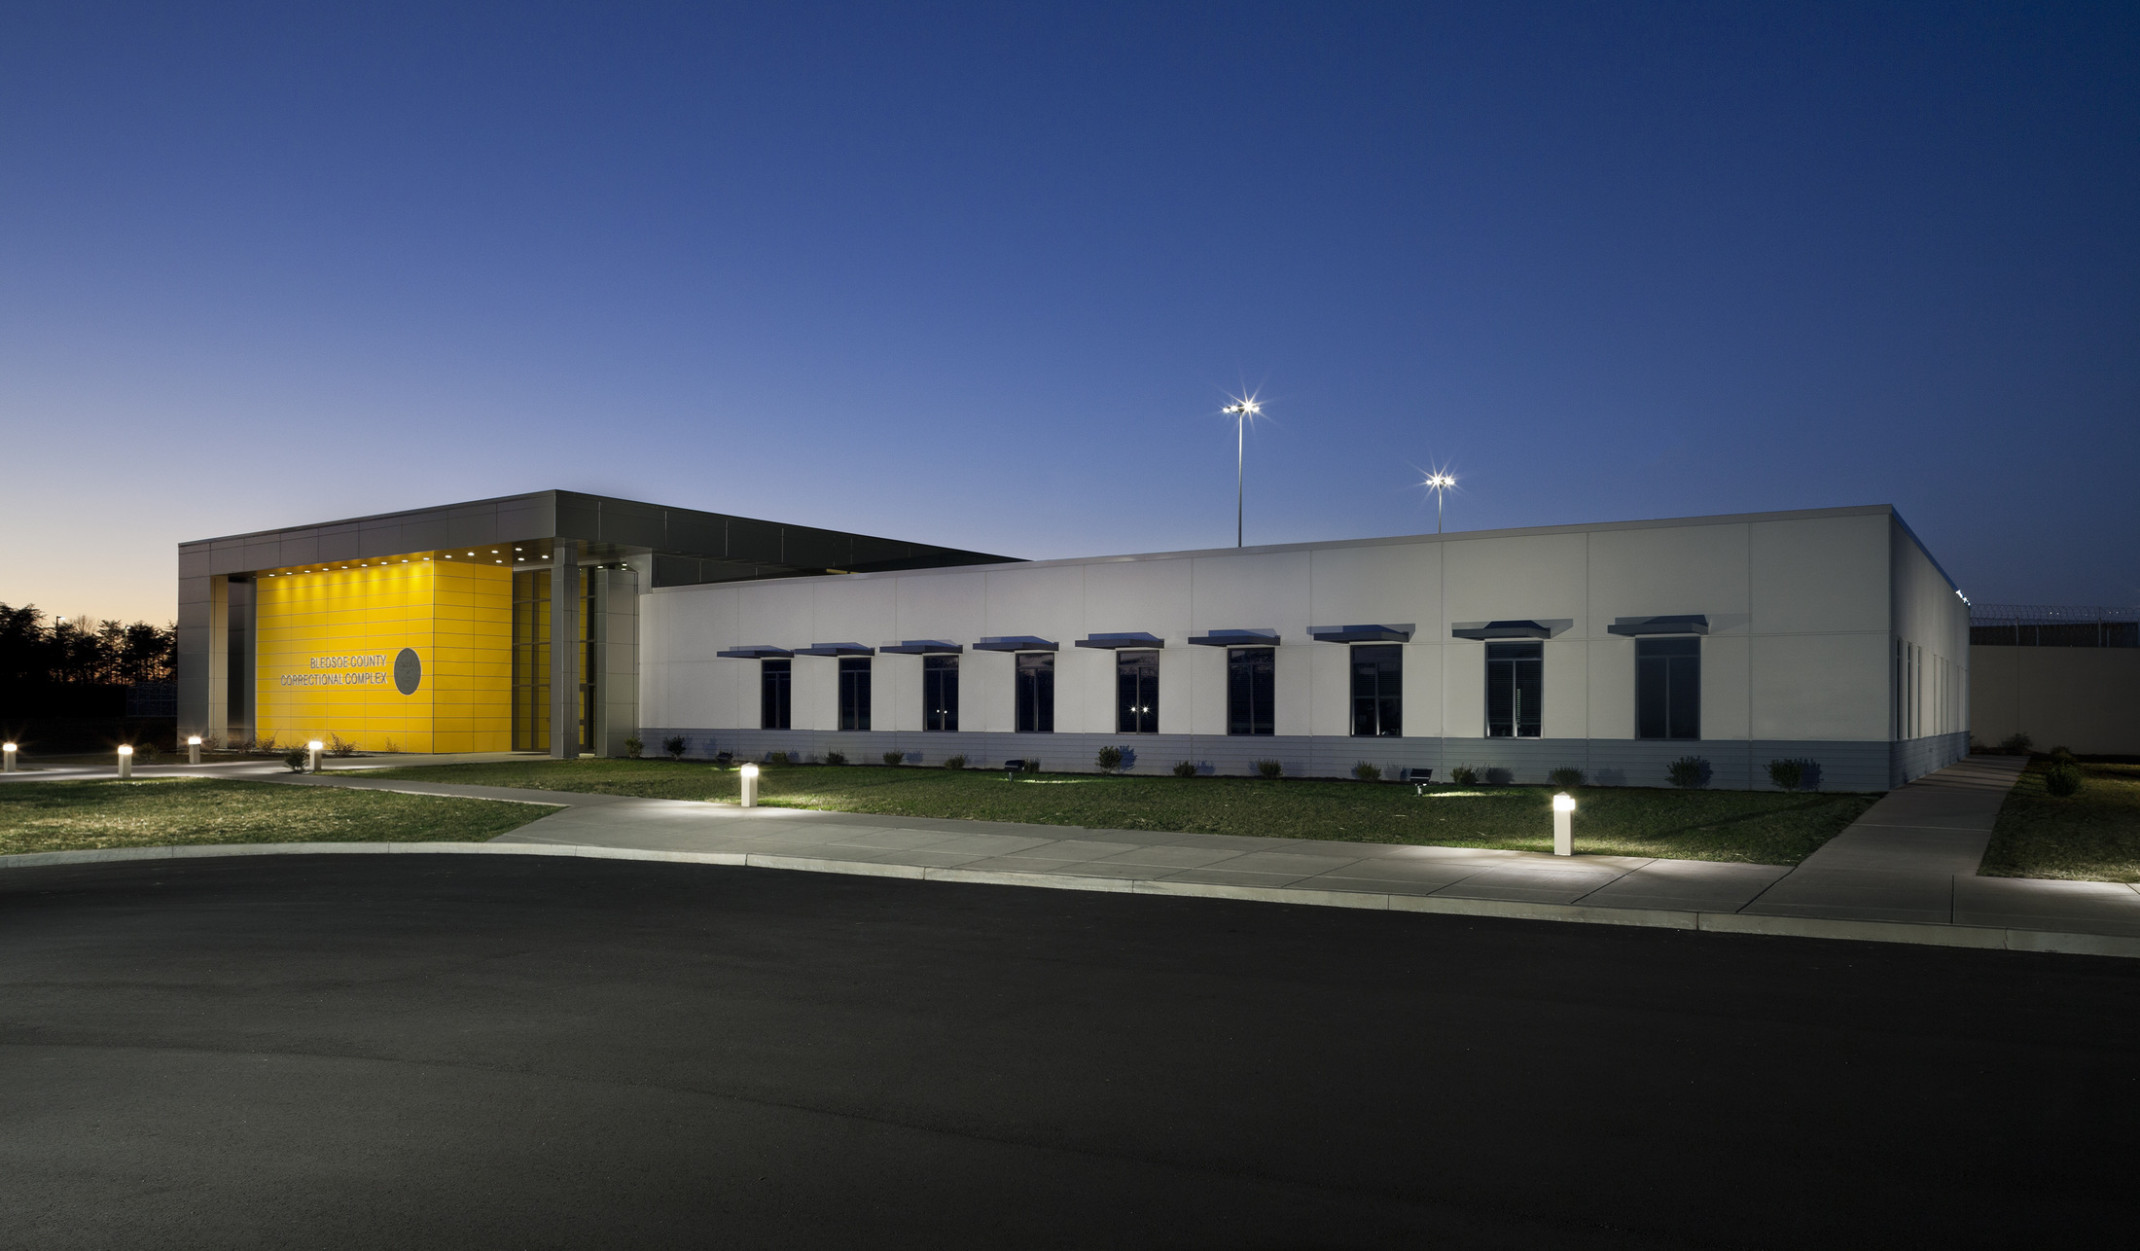 The Bledsoe County Correctional Complex exterior entryway viewed at night. Yellow accent wall is illuminated from above